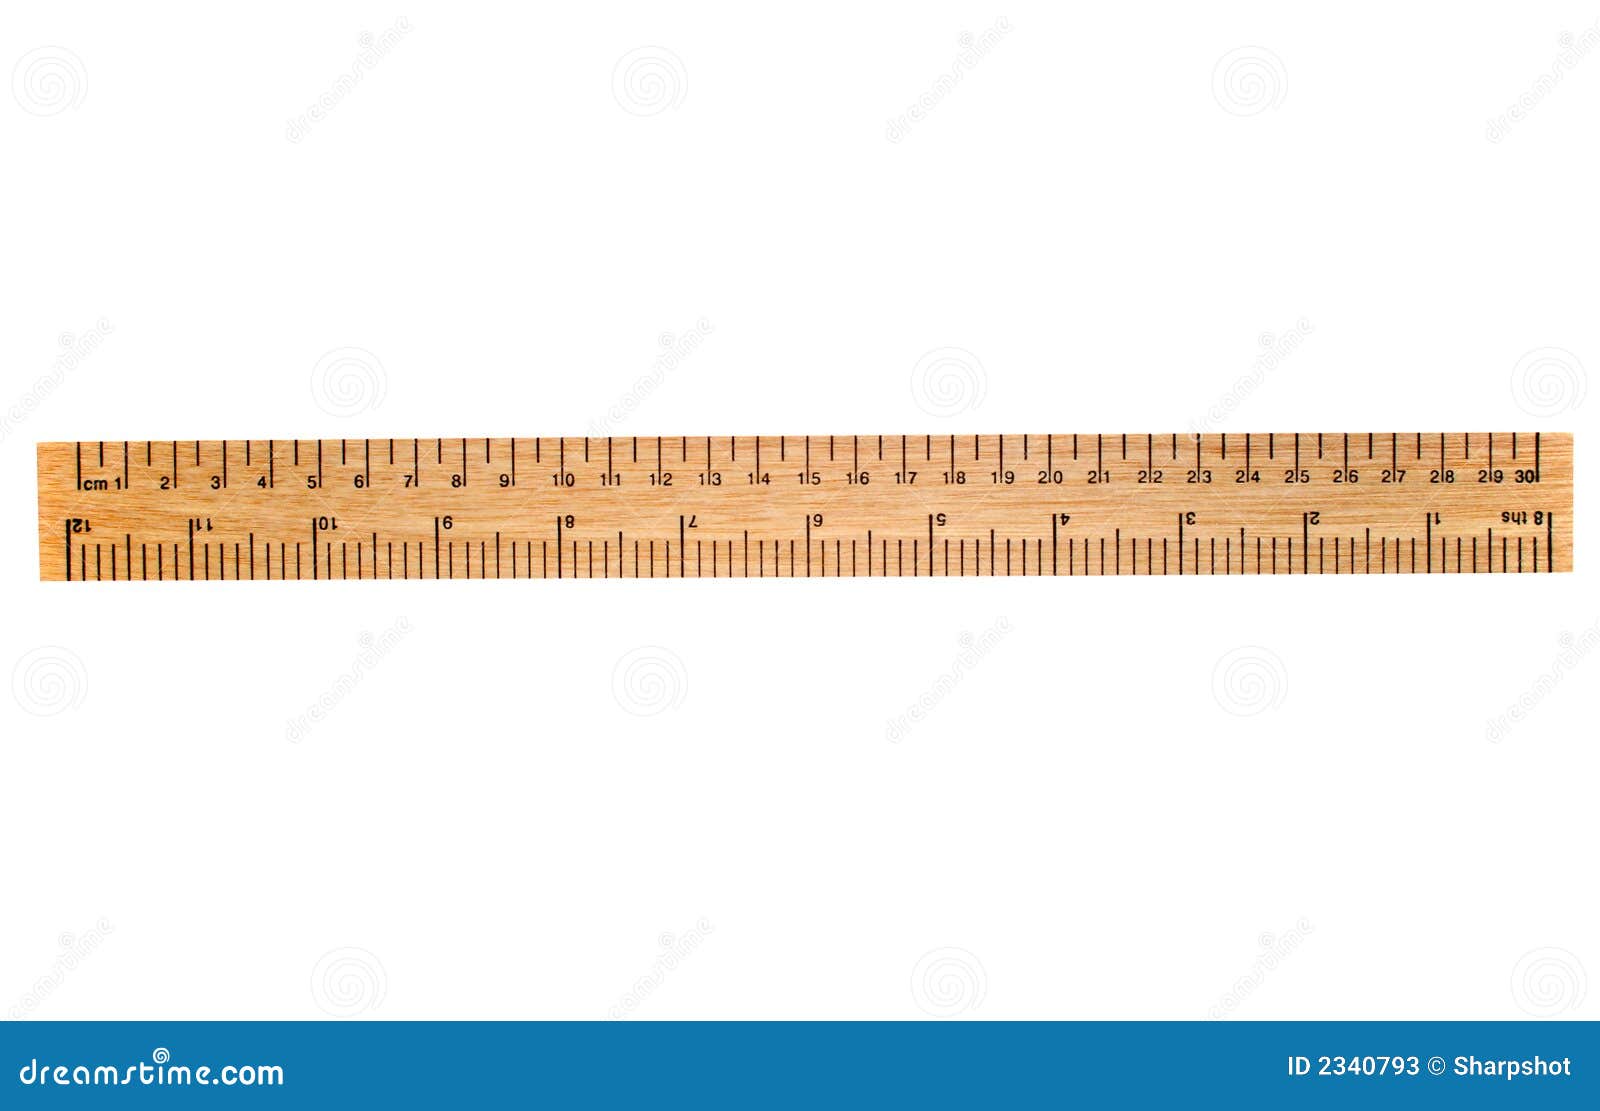 30 cm wooden ruler, isolated on a white background. Flip it over for 